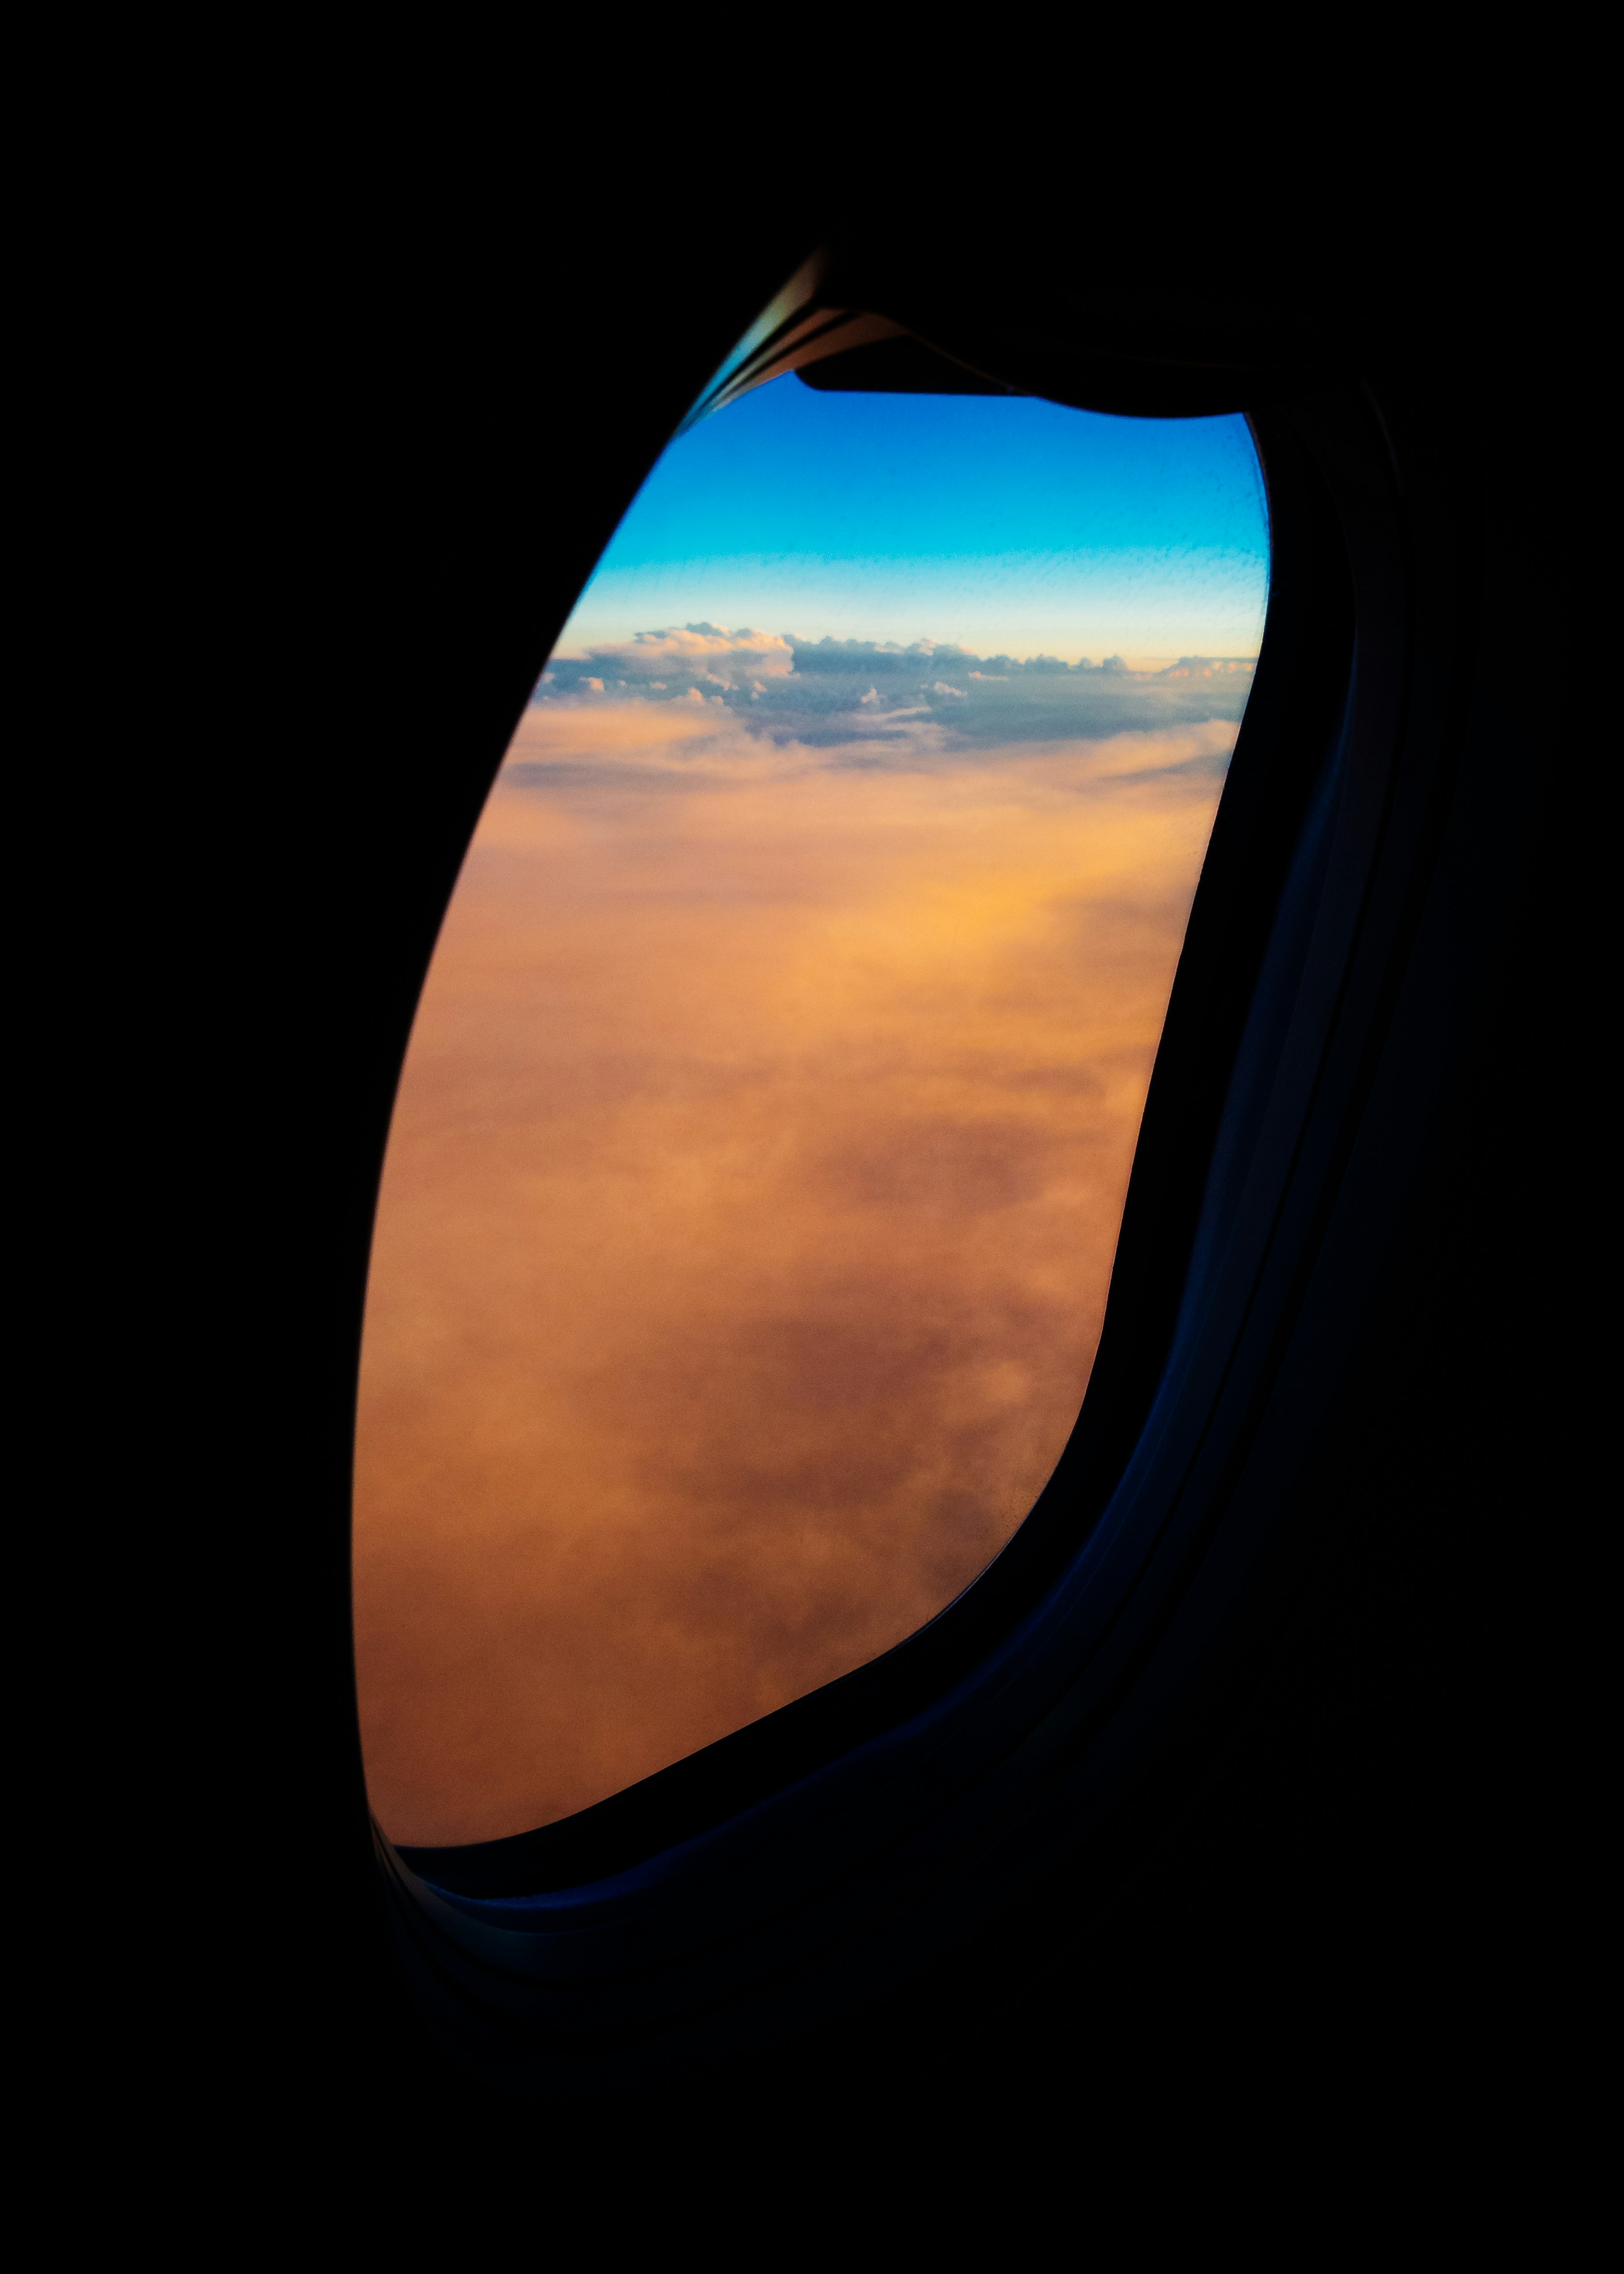 aircraft window overlooking orange clouds during daytime